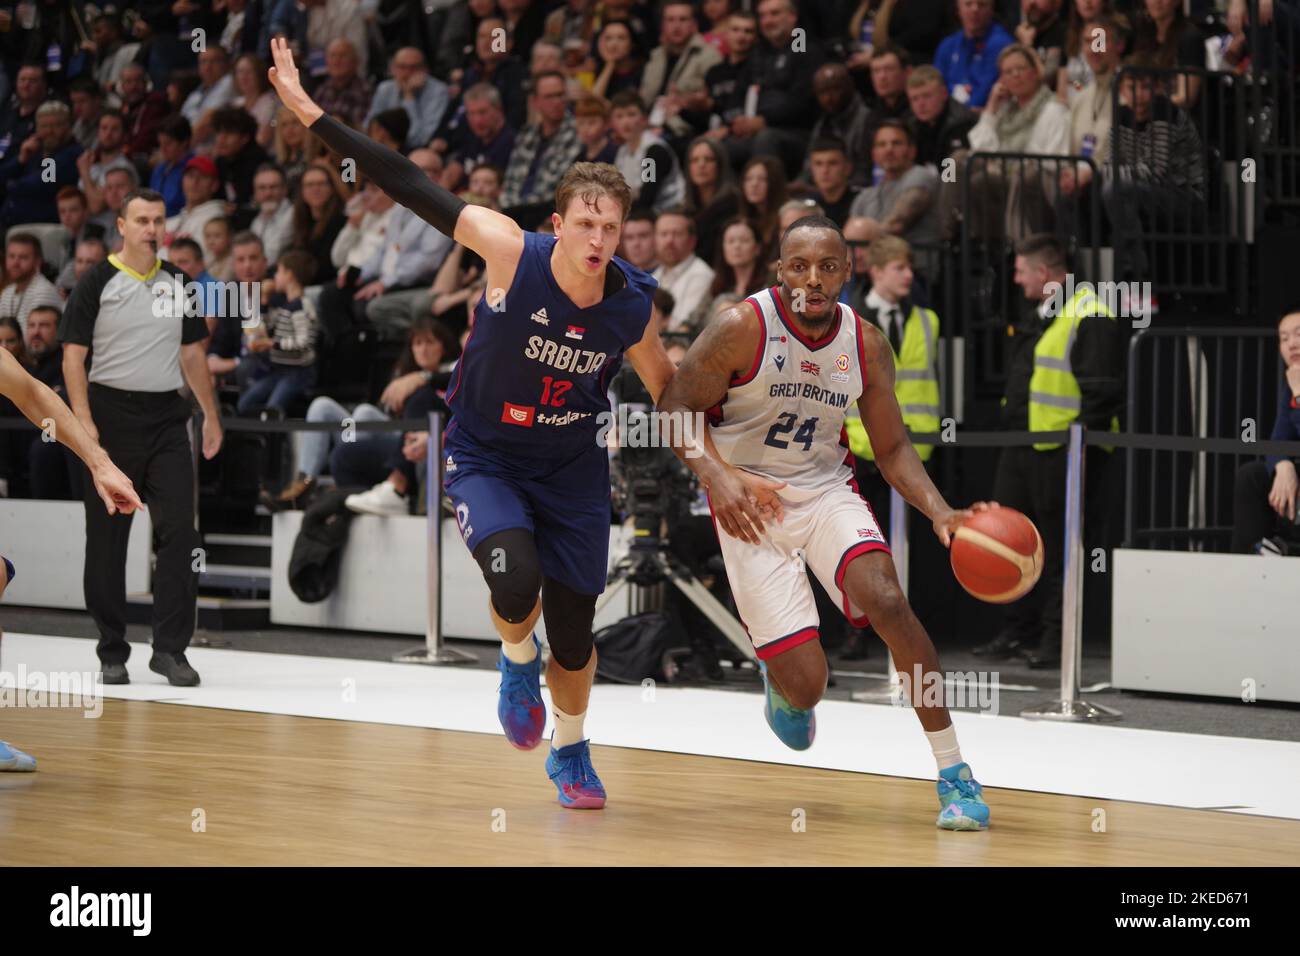 Newcastle upon Tyne, England, 11 November 2022. Aleksa Radanov playing for Serbia and Carl Wheatle playing for Great Britain in the FIBA Basketball World Cup 2023 Qualifiers at the Vertu Motors Arena. Credit: Colin Edwards/Alamy Live News Stock Photo